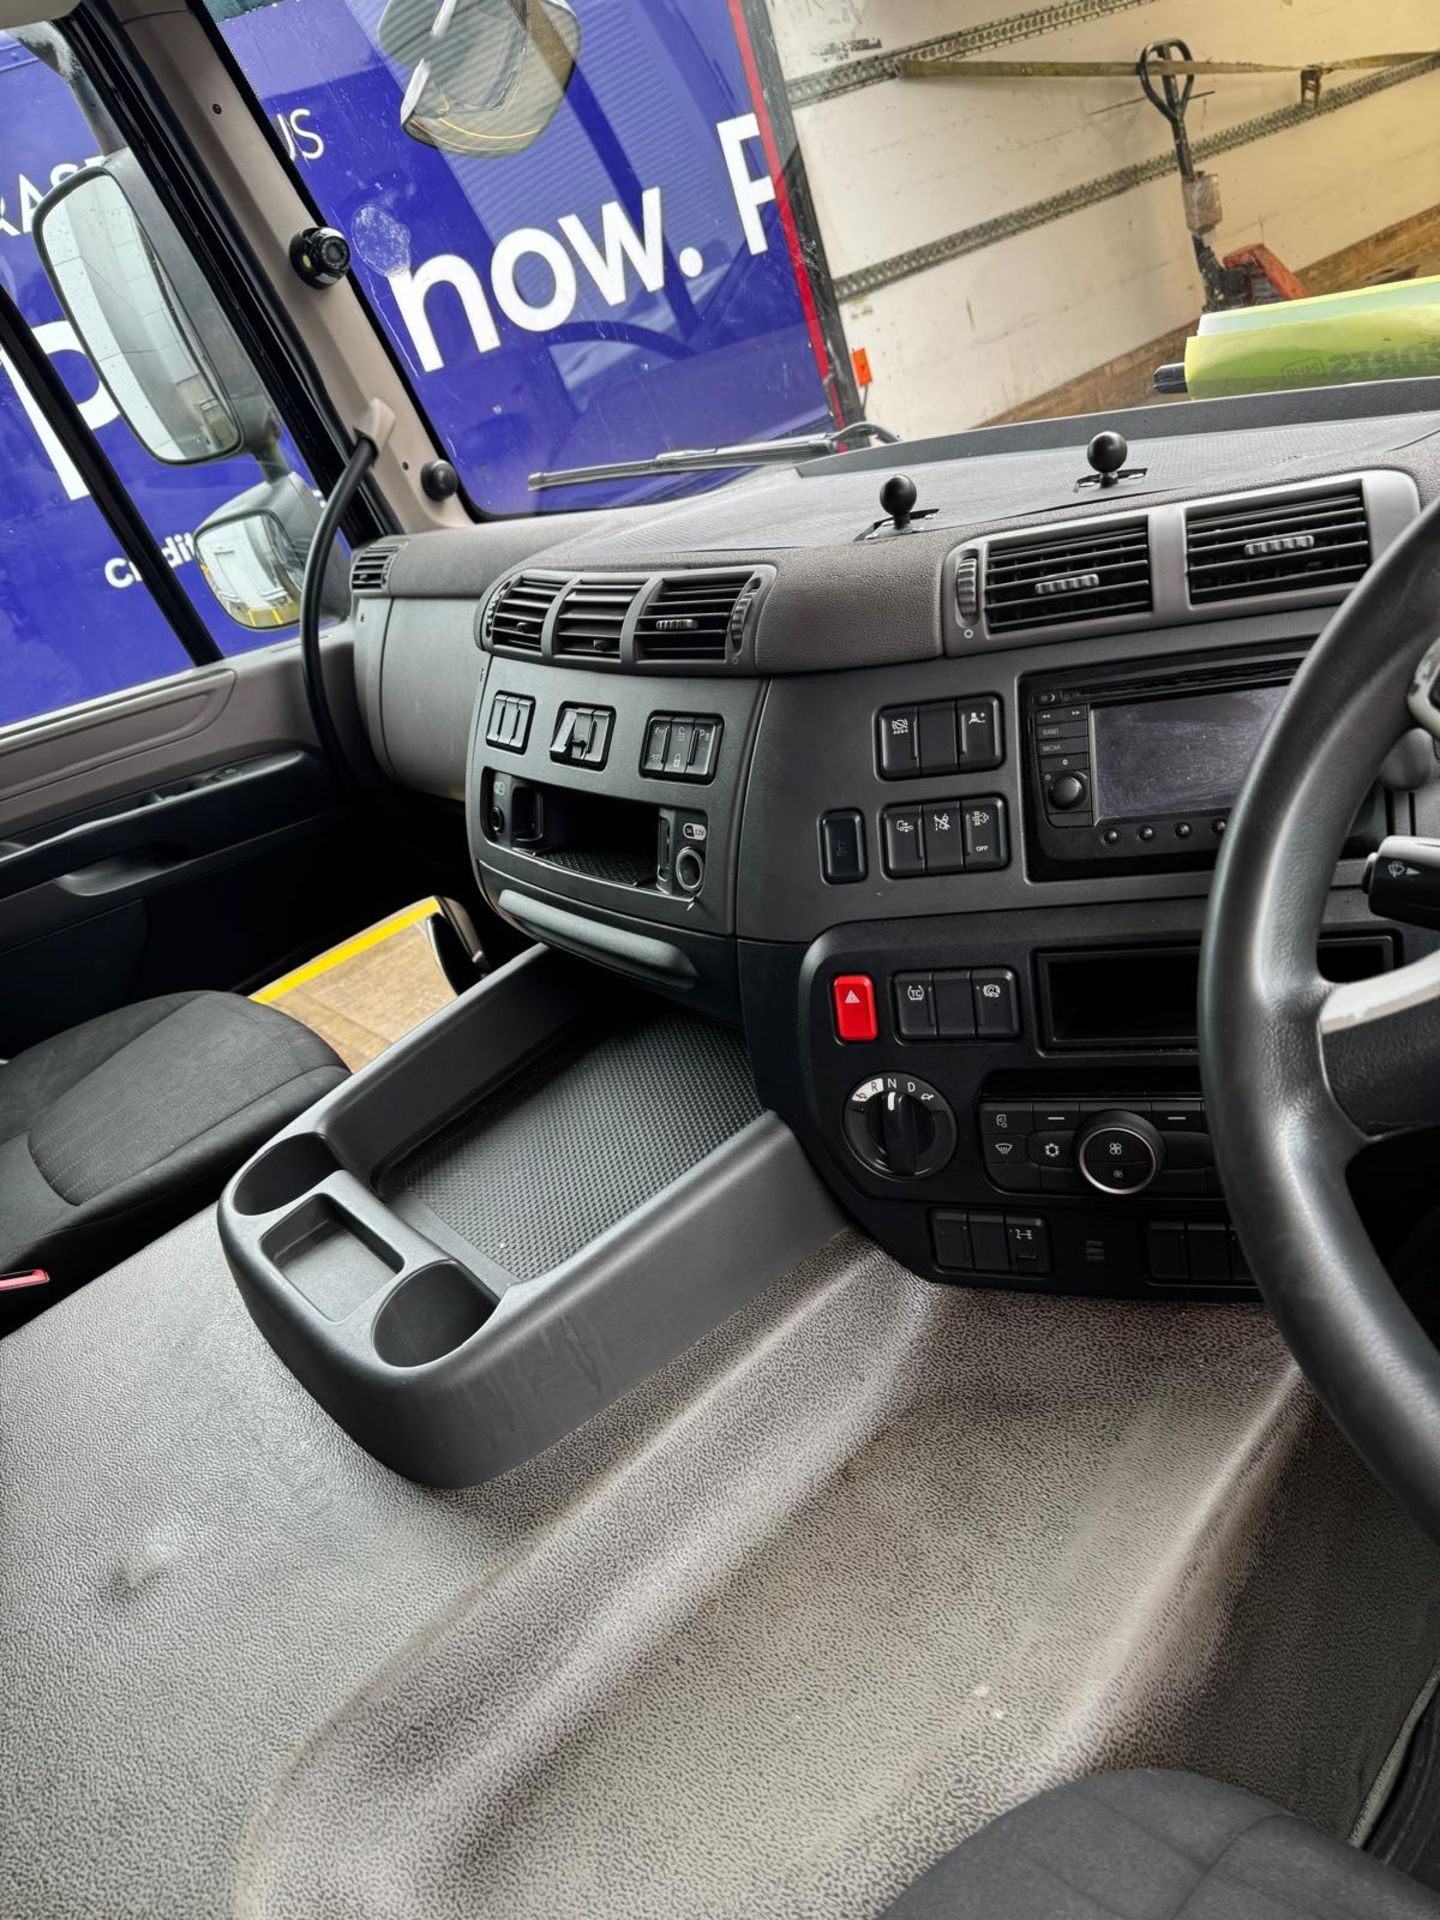 2019, DAF CF 260 FA (Ex-Fleet Owned & Maintained) - FN69 AXC (18 Ton Rigid Truck with Tail Lift) - Image 6 of 12